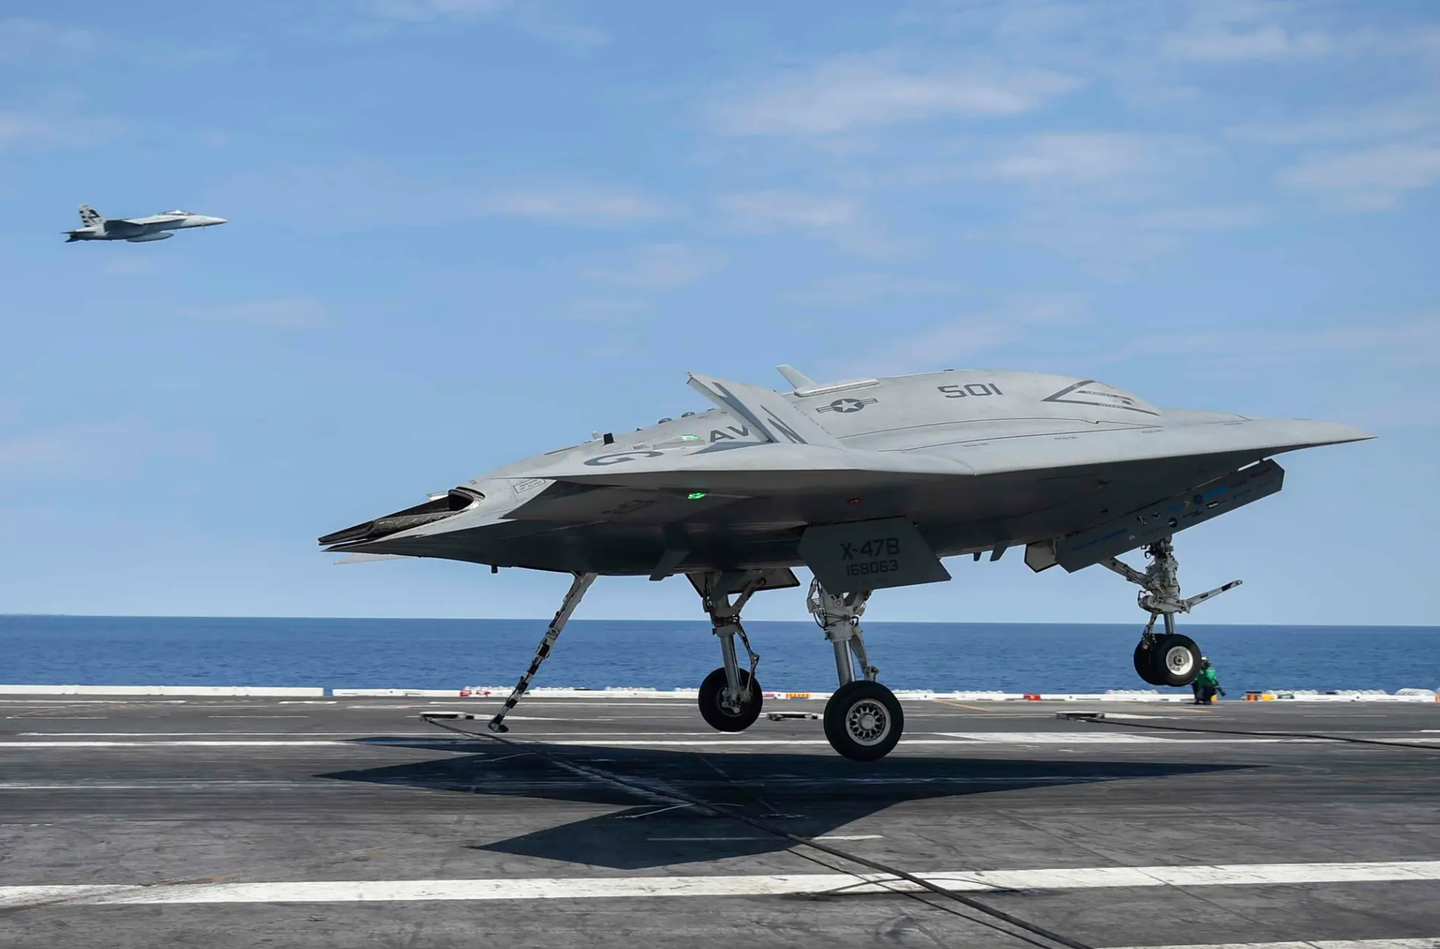 The Northrop Grumman X-47B demonstrator&nbsp;used for the abortive Unmanned Carrier-Launched Airborne Surveillance and Strike (UCLASS) program, which would have led to a final combat-ready design. <em>U.S. Navy</em>